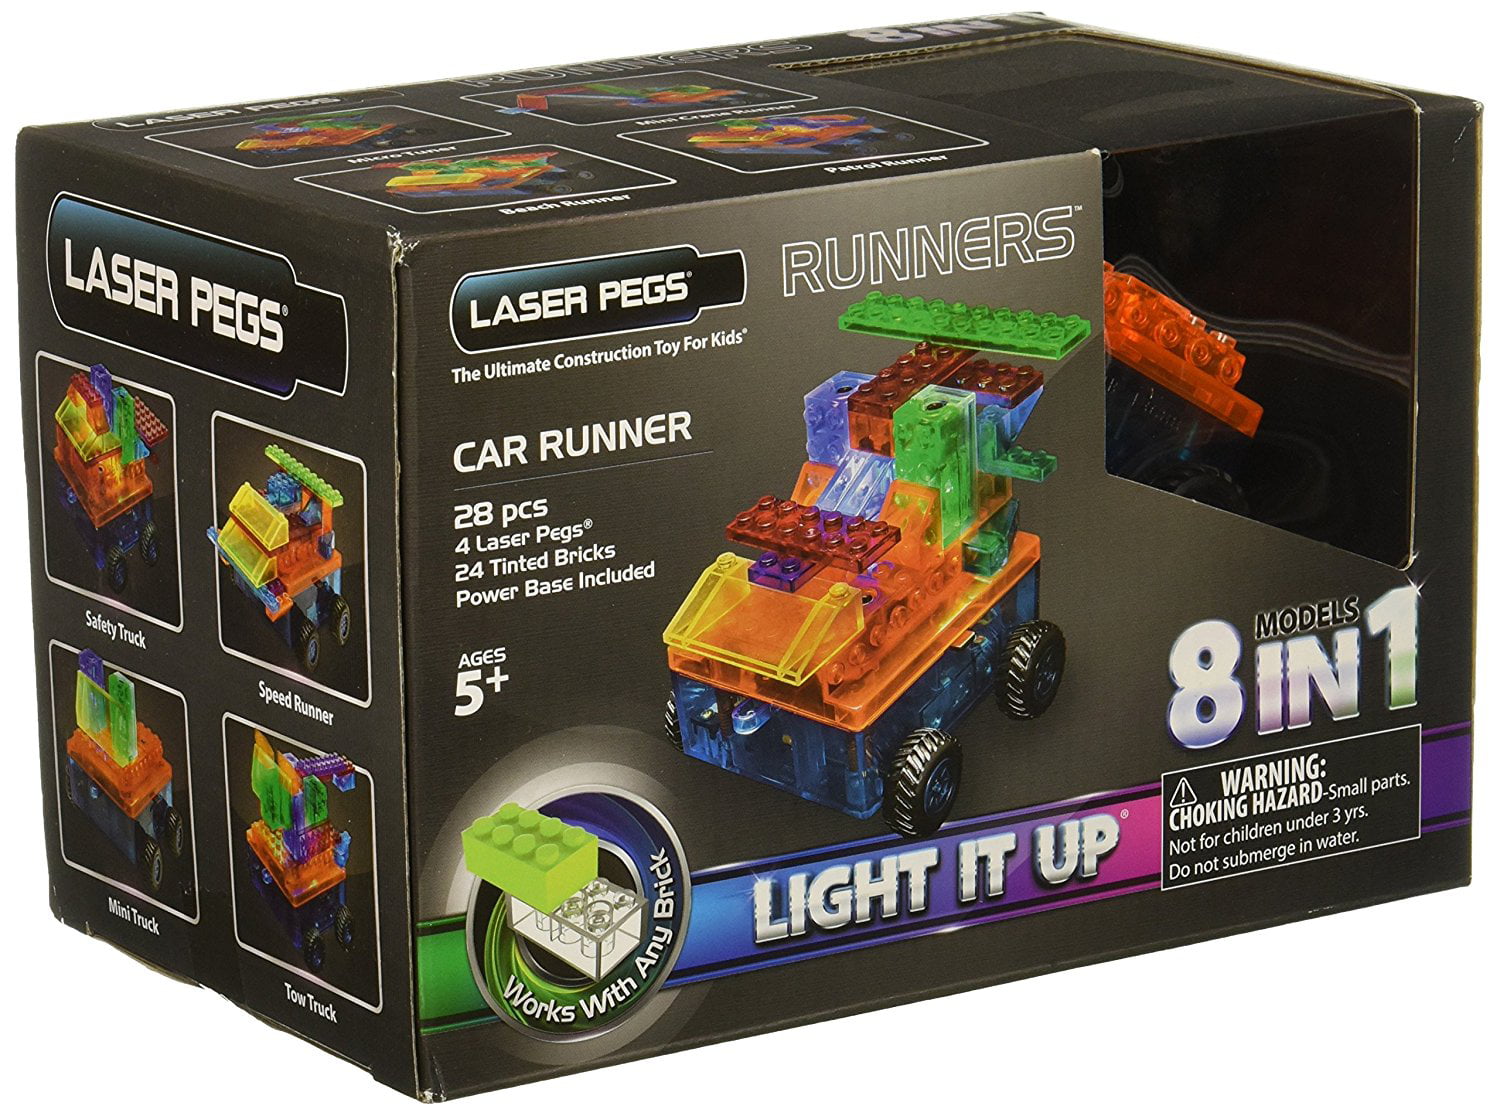 Car Runners Laser Pegs Lighted Construction Toy 6 in 1 Motorized Building Blocks for sale online 